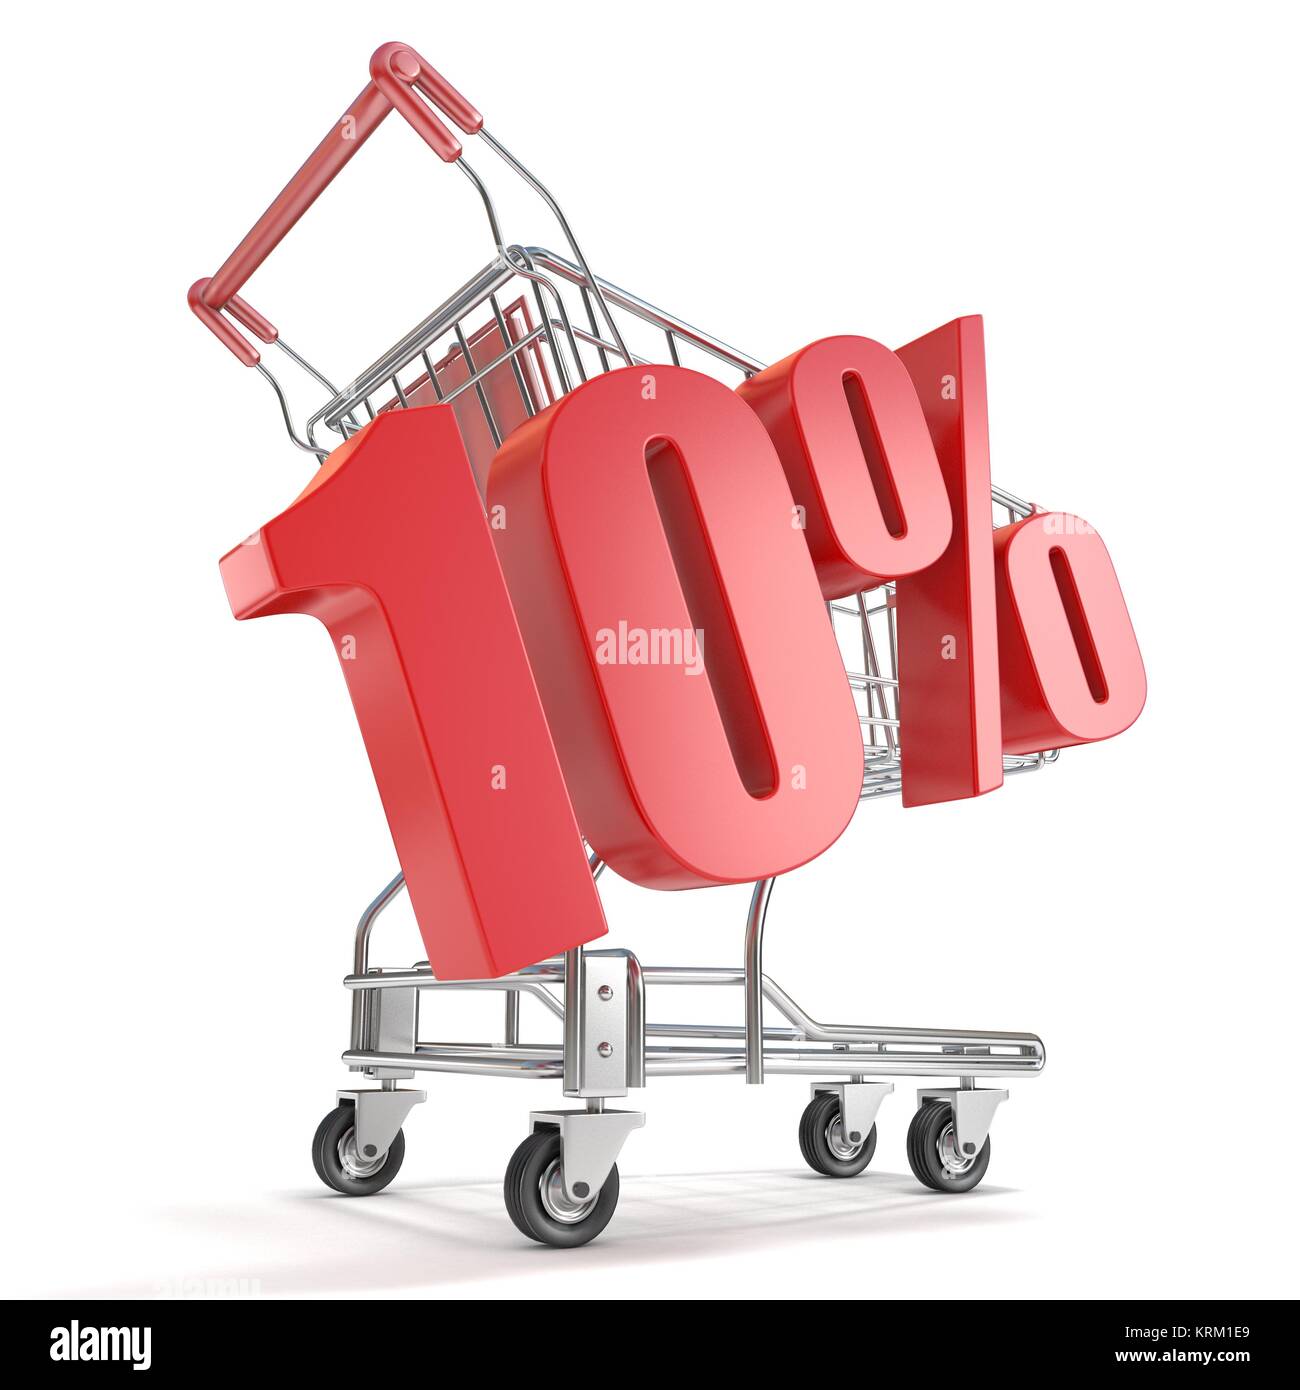 10% - ten percent discount in front of shopping cart. Sale concept. 3D Stock Photo